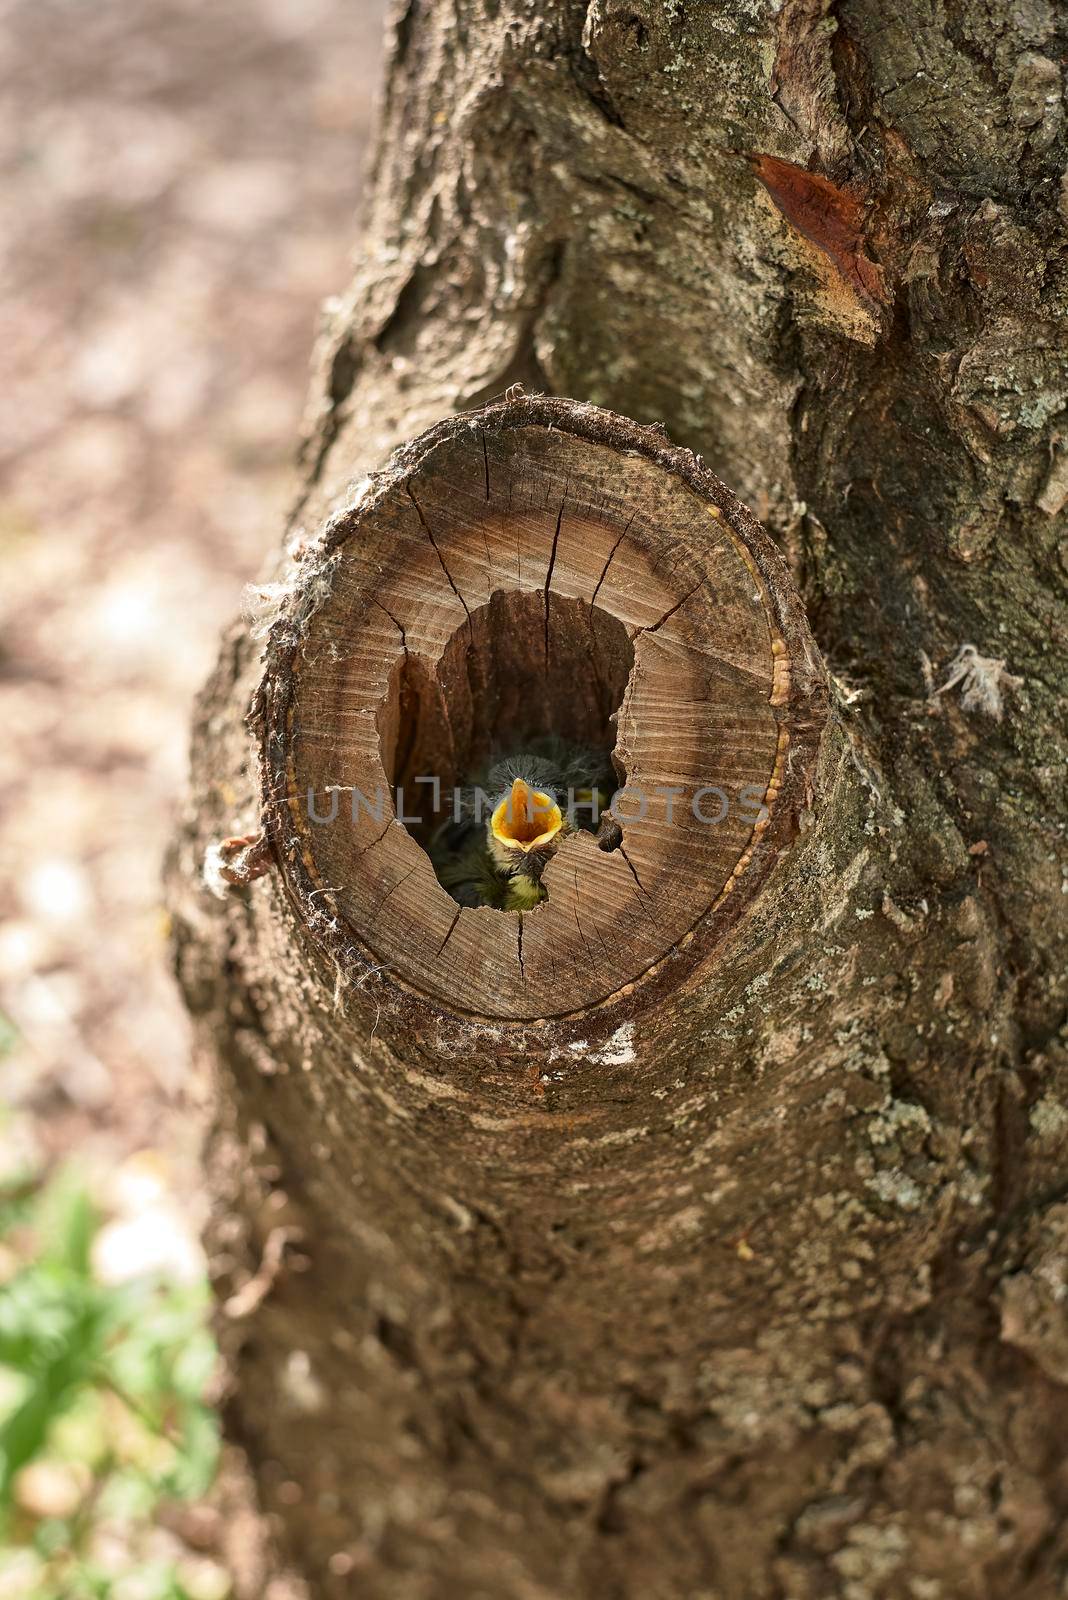 Small bird in a nest inside a tree. Wood, close-up, detail and macro photography, blurred background. Hatchling begging for food